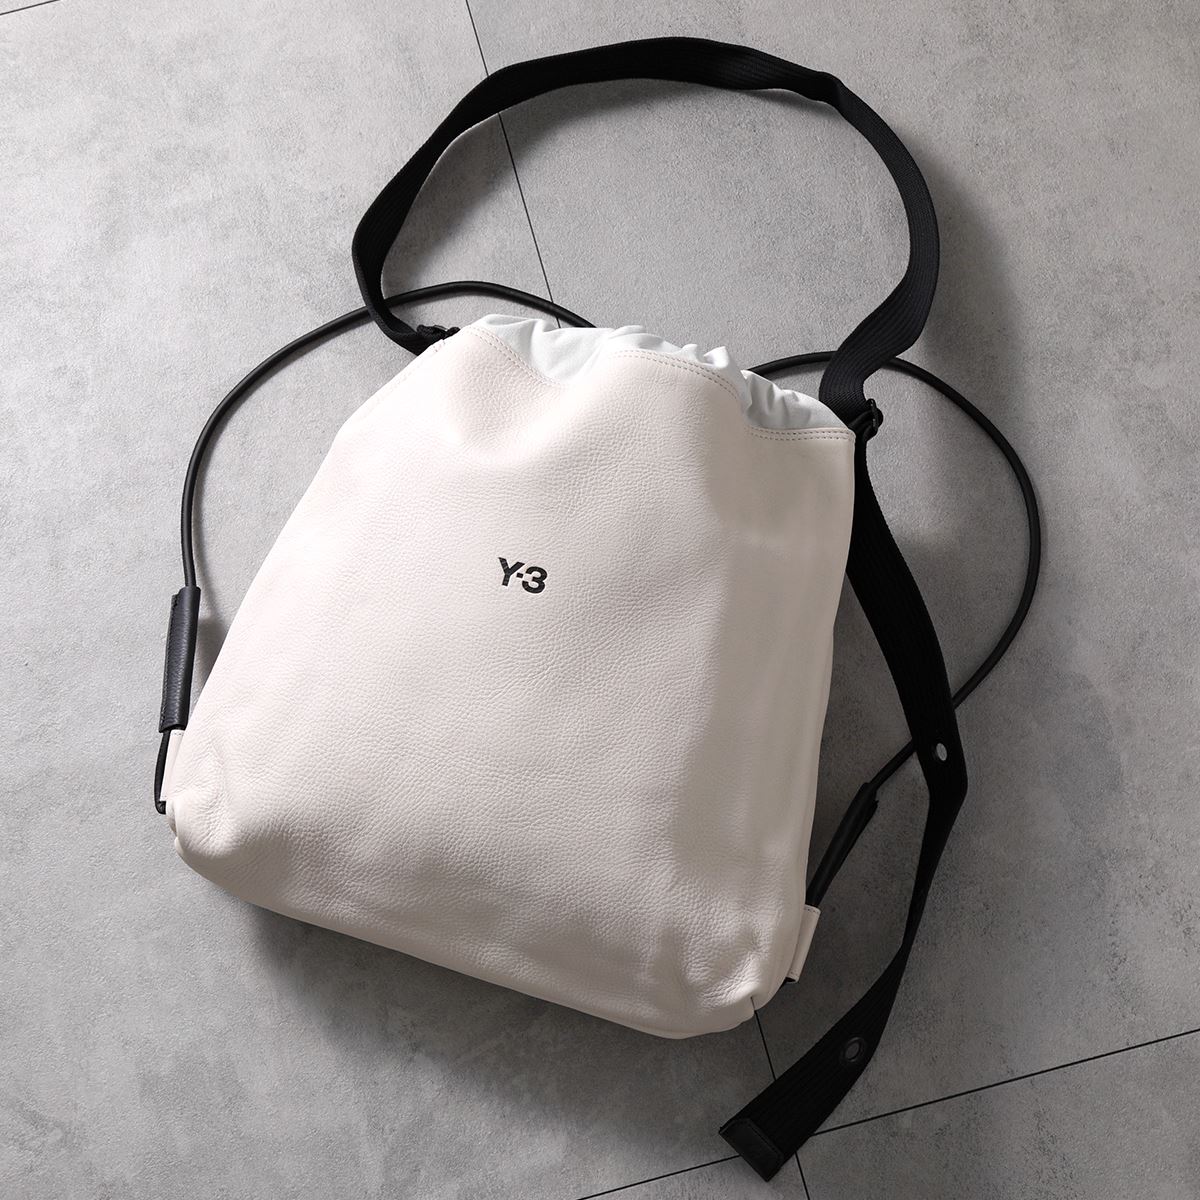 Y-3 ワイスリー トートバッグ LUX GYM BAG ジム バッグ IJ9876 IJ9877 メンズ バックパック レザー ロゴ 鞄 カラー2色｜s-musee｜02